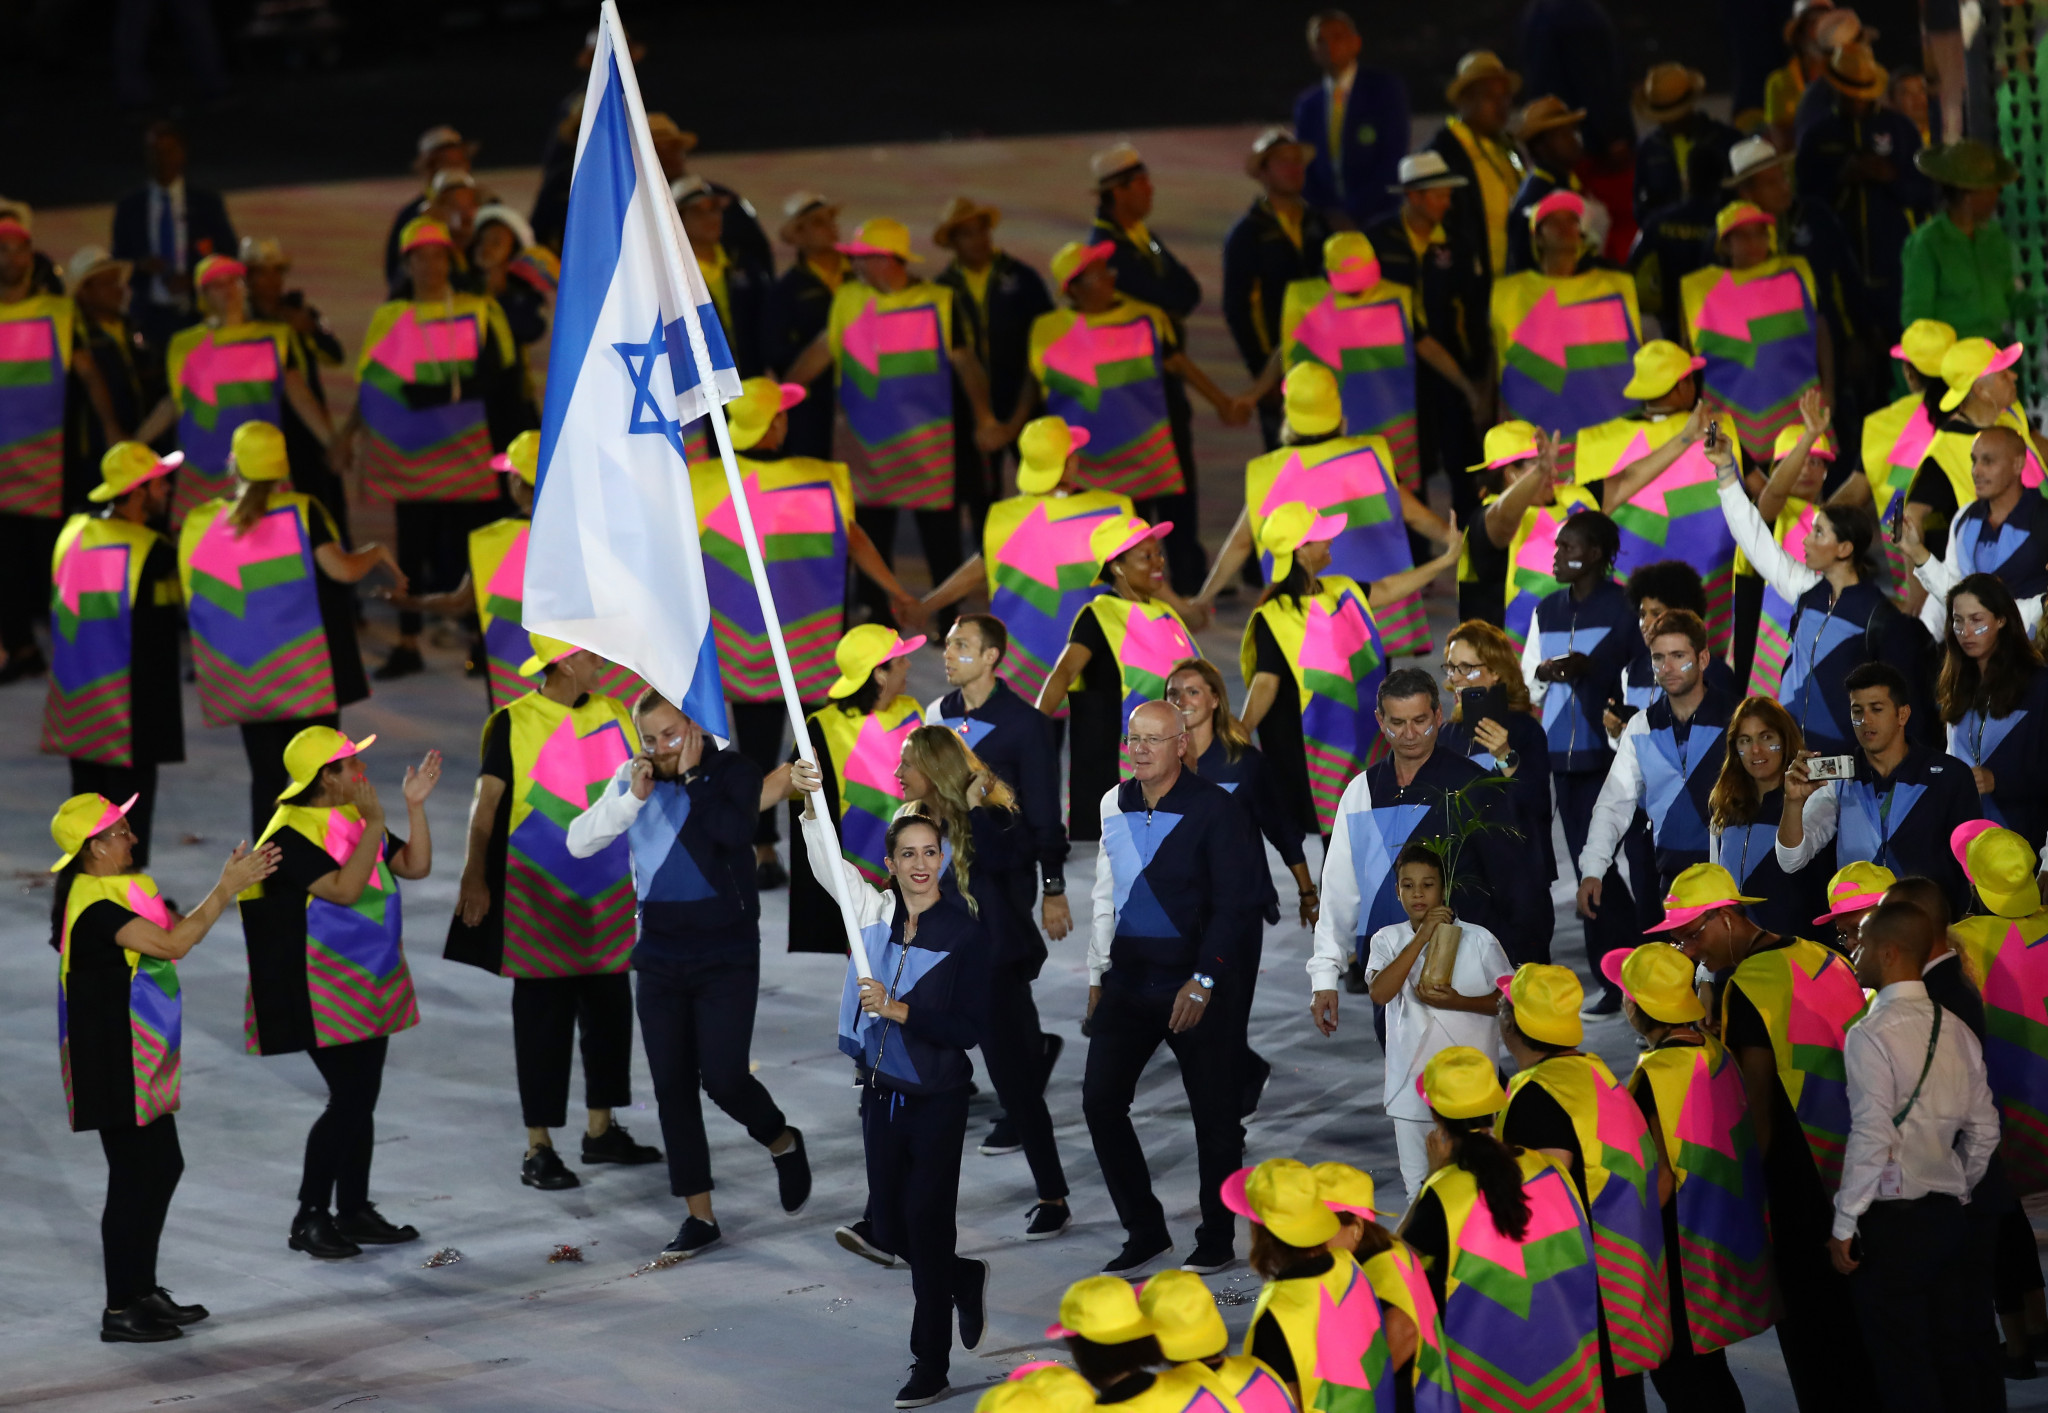 Israel fielded 47 and 33 athletes respectively at the Rio 2016 Olympics and Paralympics ©Getty Images